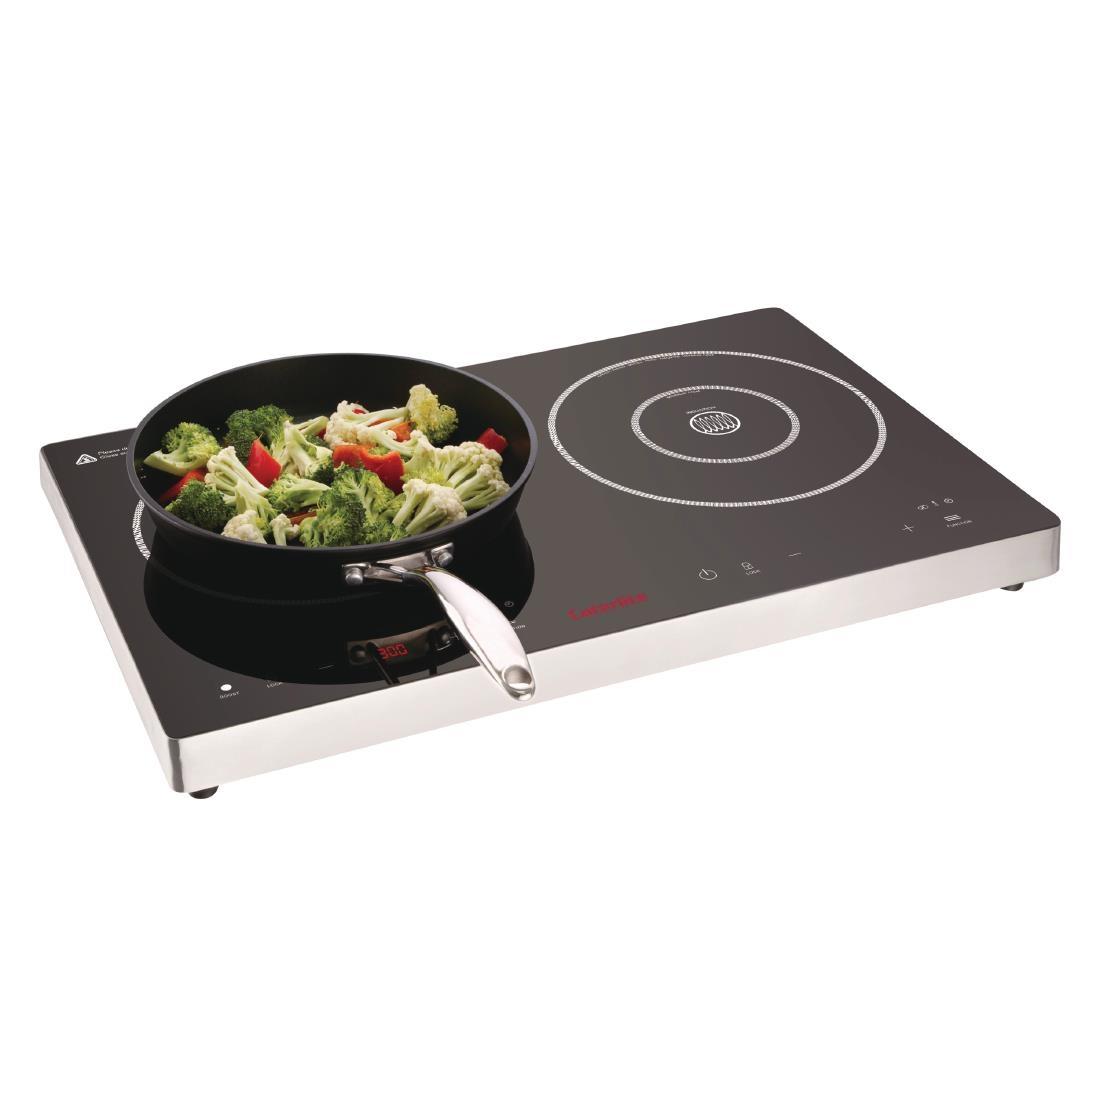 Caterlite Touch Control Double Induction Hob - DF824  - 2